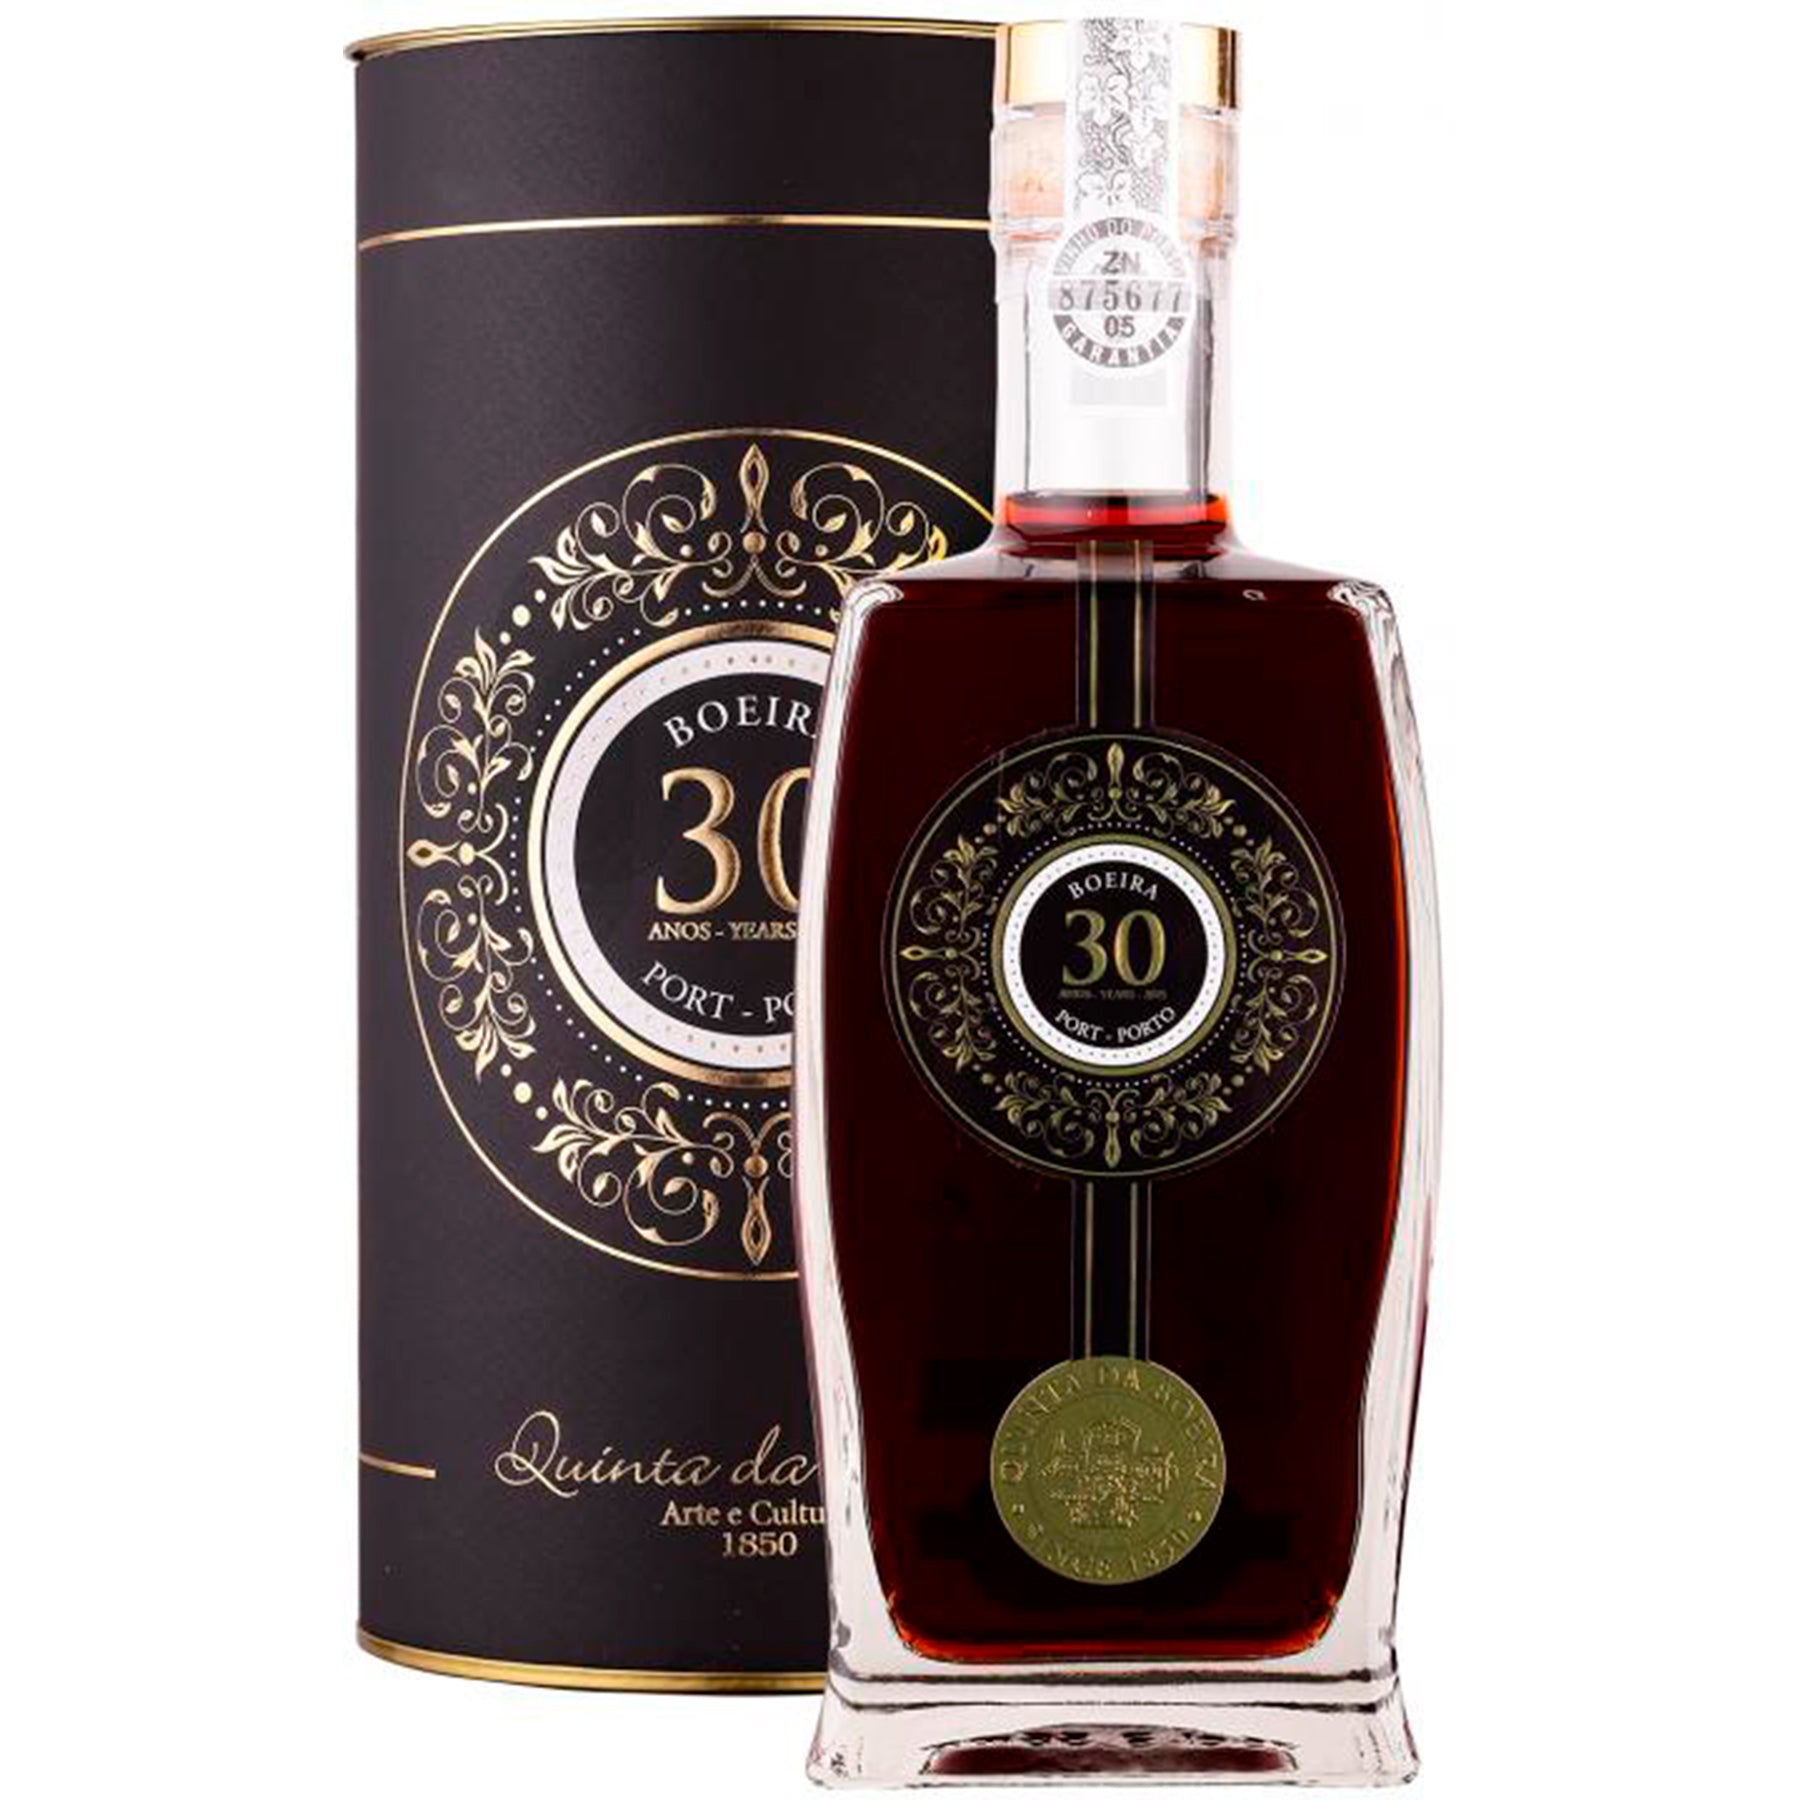 Quinta Boeira 30 Years Old Tawny Port